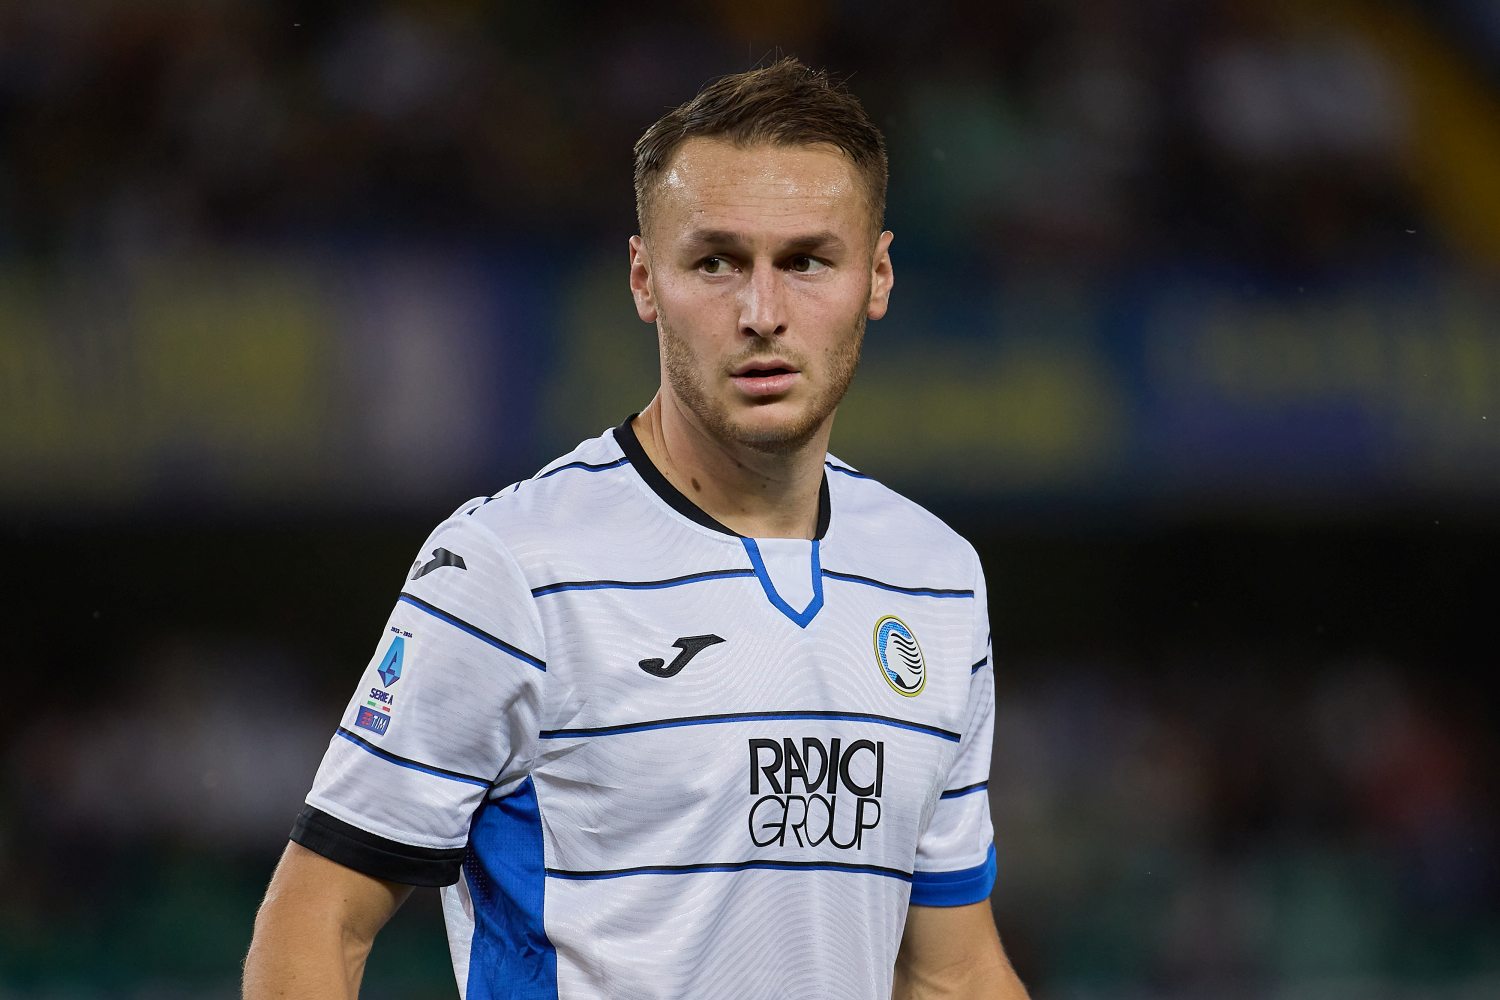 Teun Koopmeiners has announced that he plans to leave Atalanta next summer, although he wants to do right by his team and fetch a big sum.